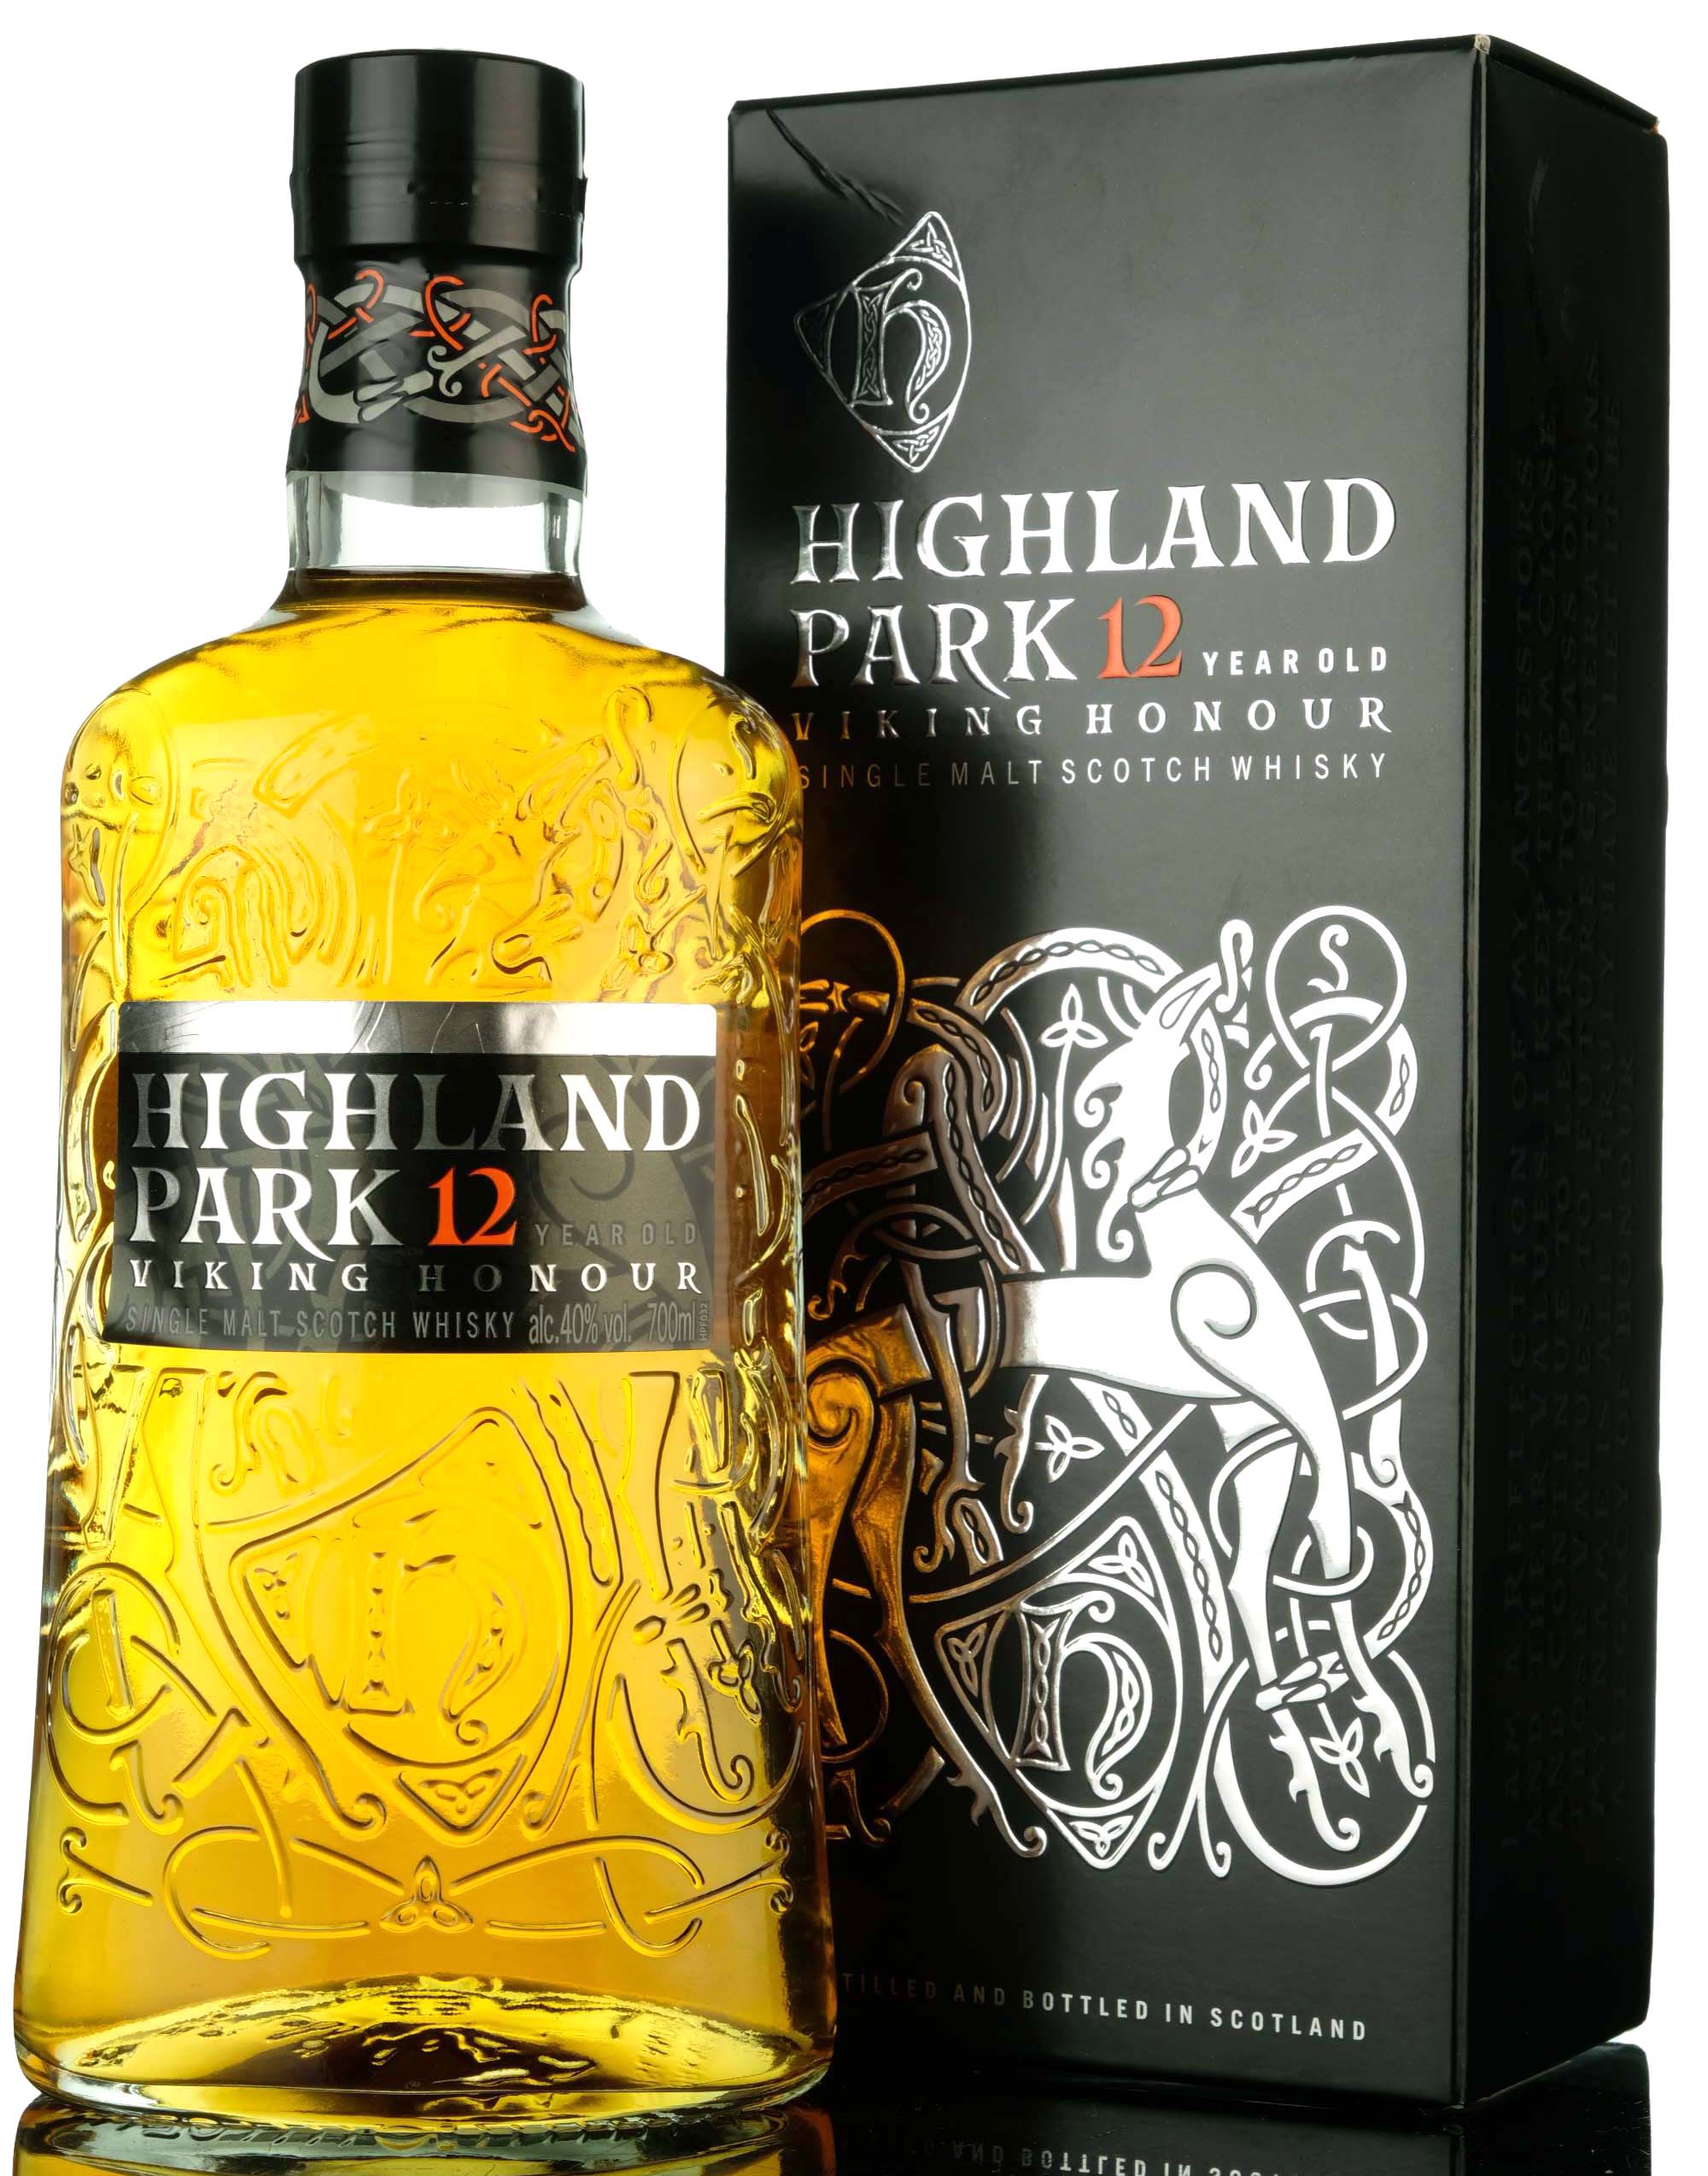 Highland Park 12 Year Old - Viking Honour - Late 2010s